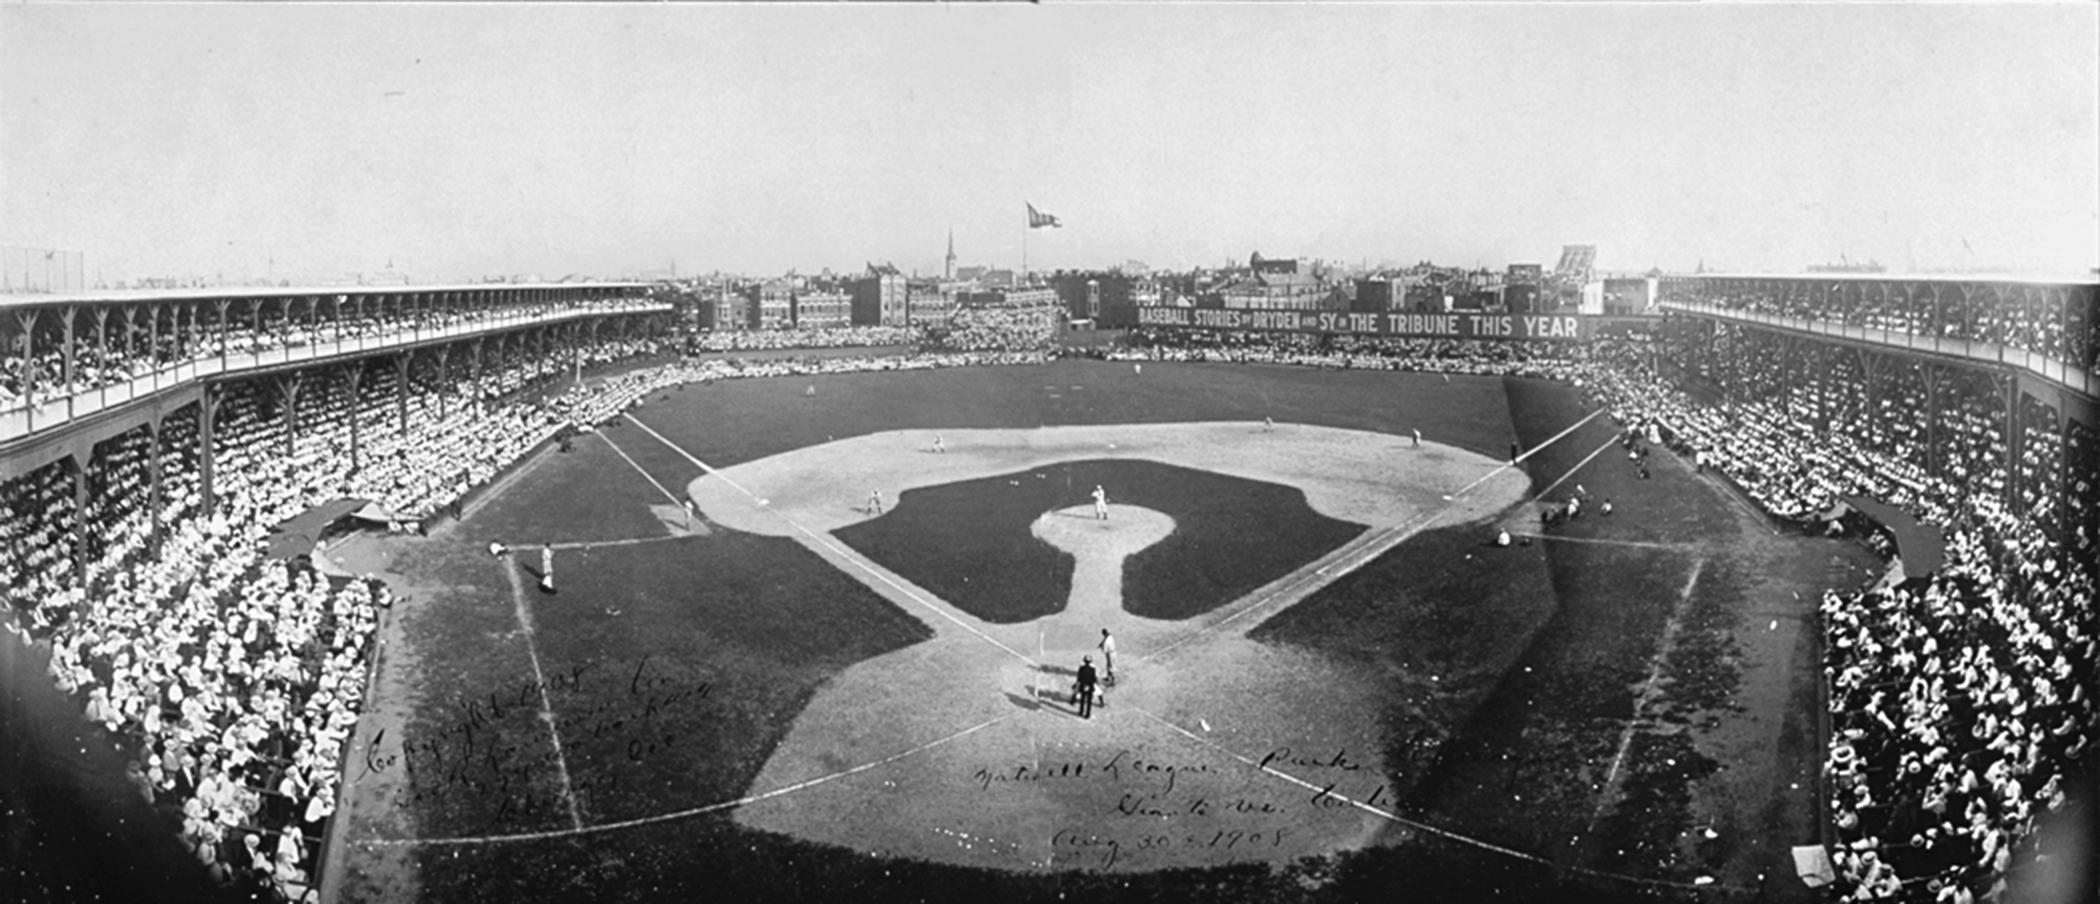 Before there was a Wrigley Field on Chicago’s North Side, the Cubs played all their home games at the West Side Grounds, located on a block bounded by Taylor, Wood, Polk, and Lincoln (now Wolcott) streets. The standing-room-only crowd at this August 30, 1908, game against archrival New York Giants was typical. (Bain Collection, Library of Congress)